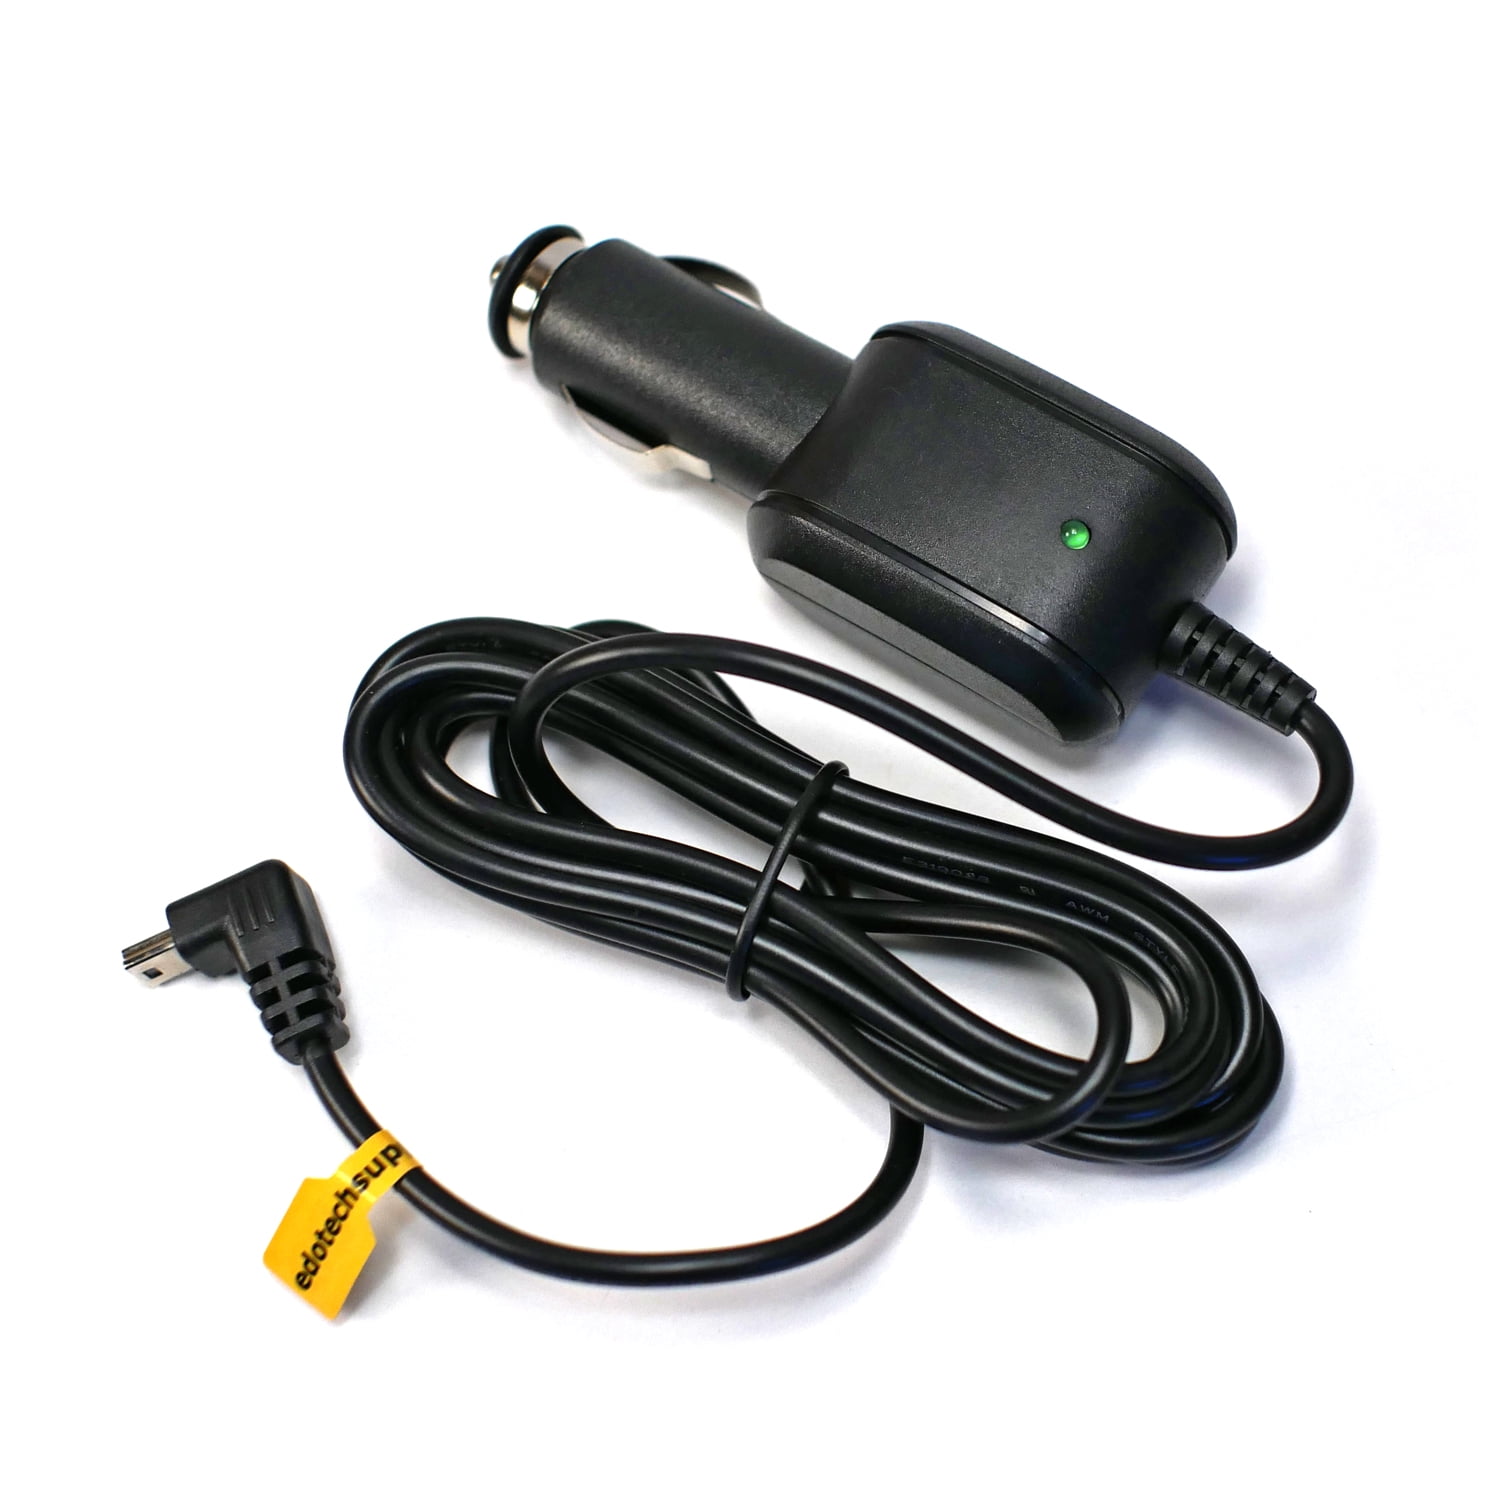 In Car Charger Power lead for Garmin Nuvi Sat Nav GPS various model *NO PC MODE* 